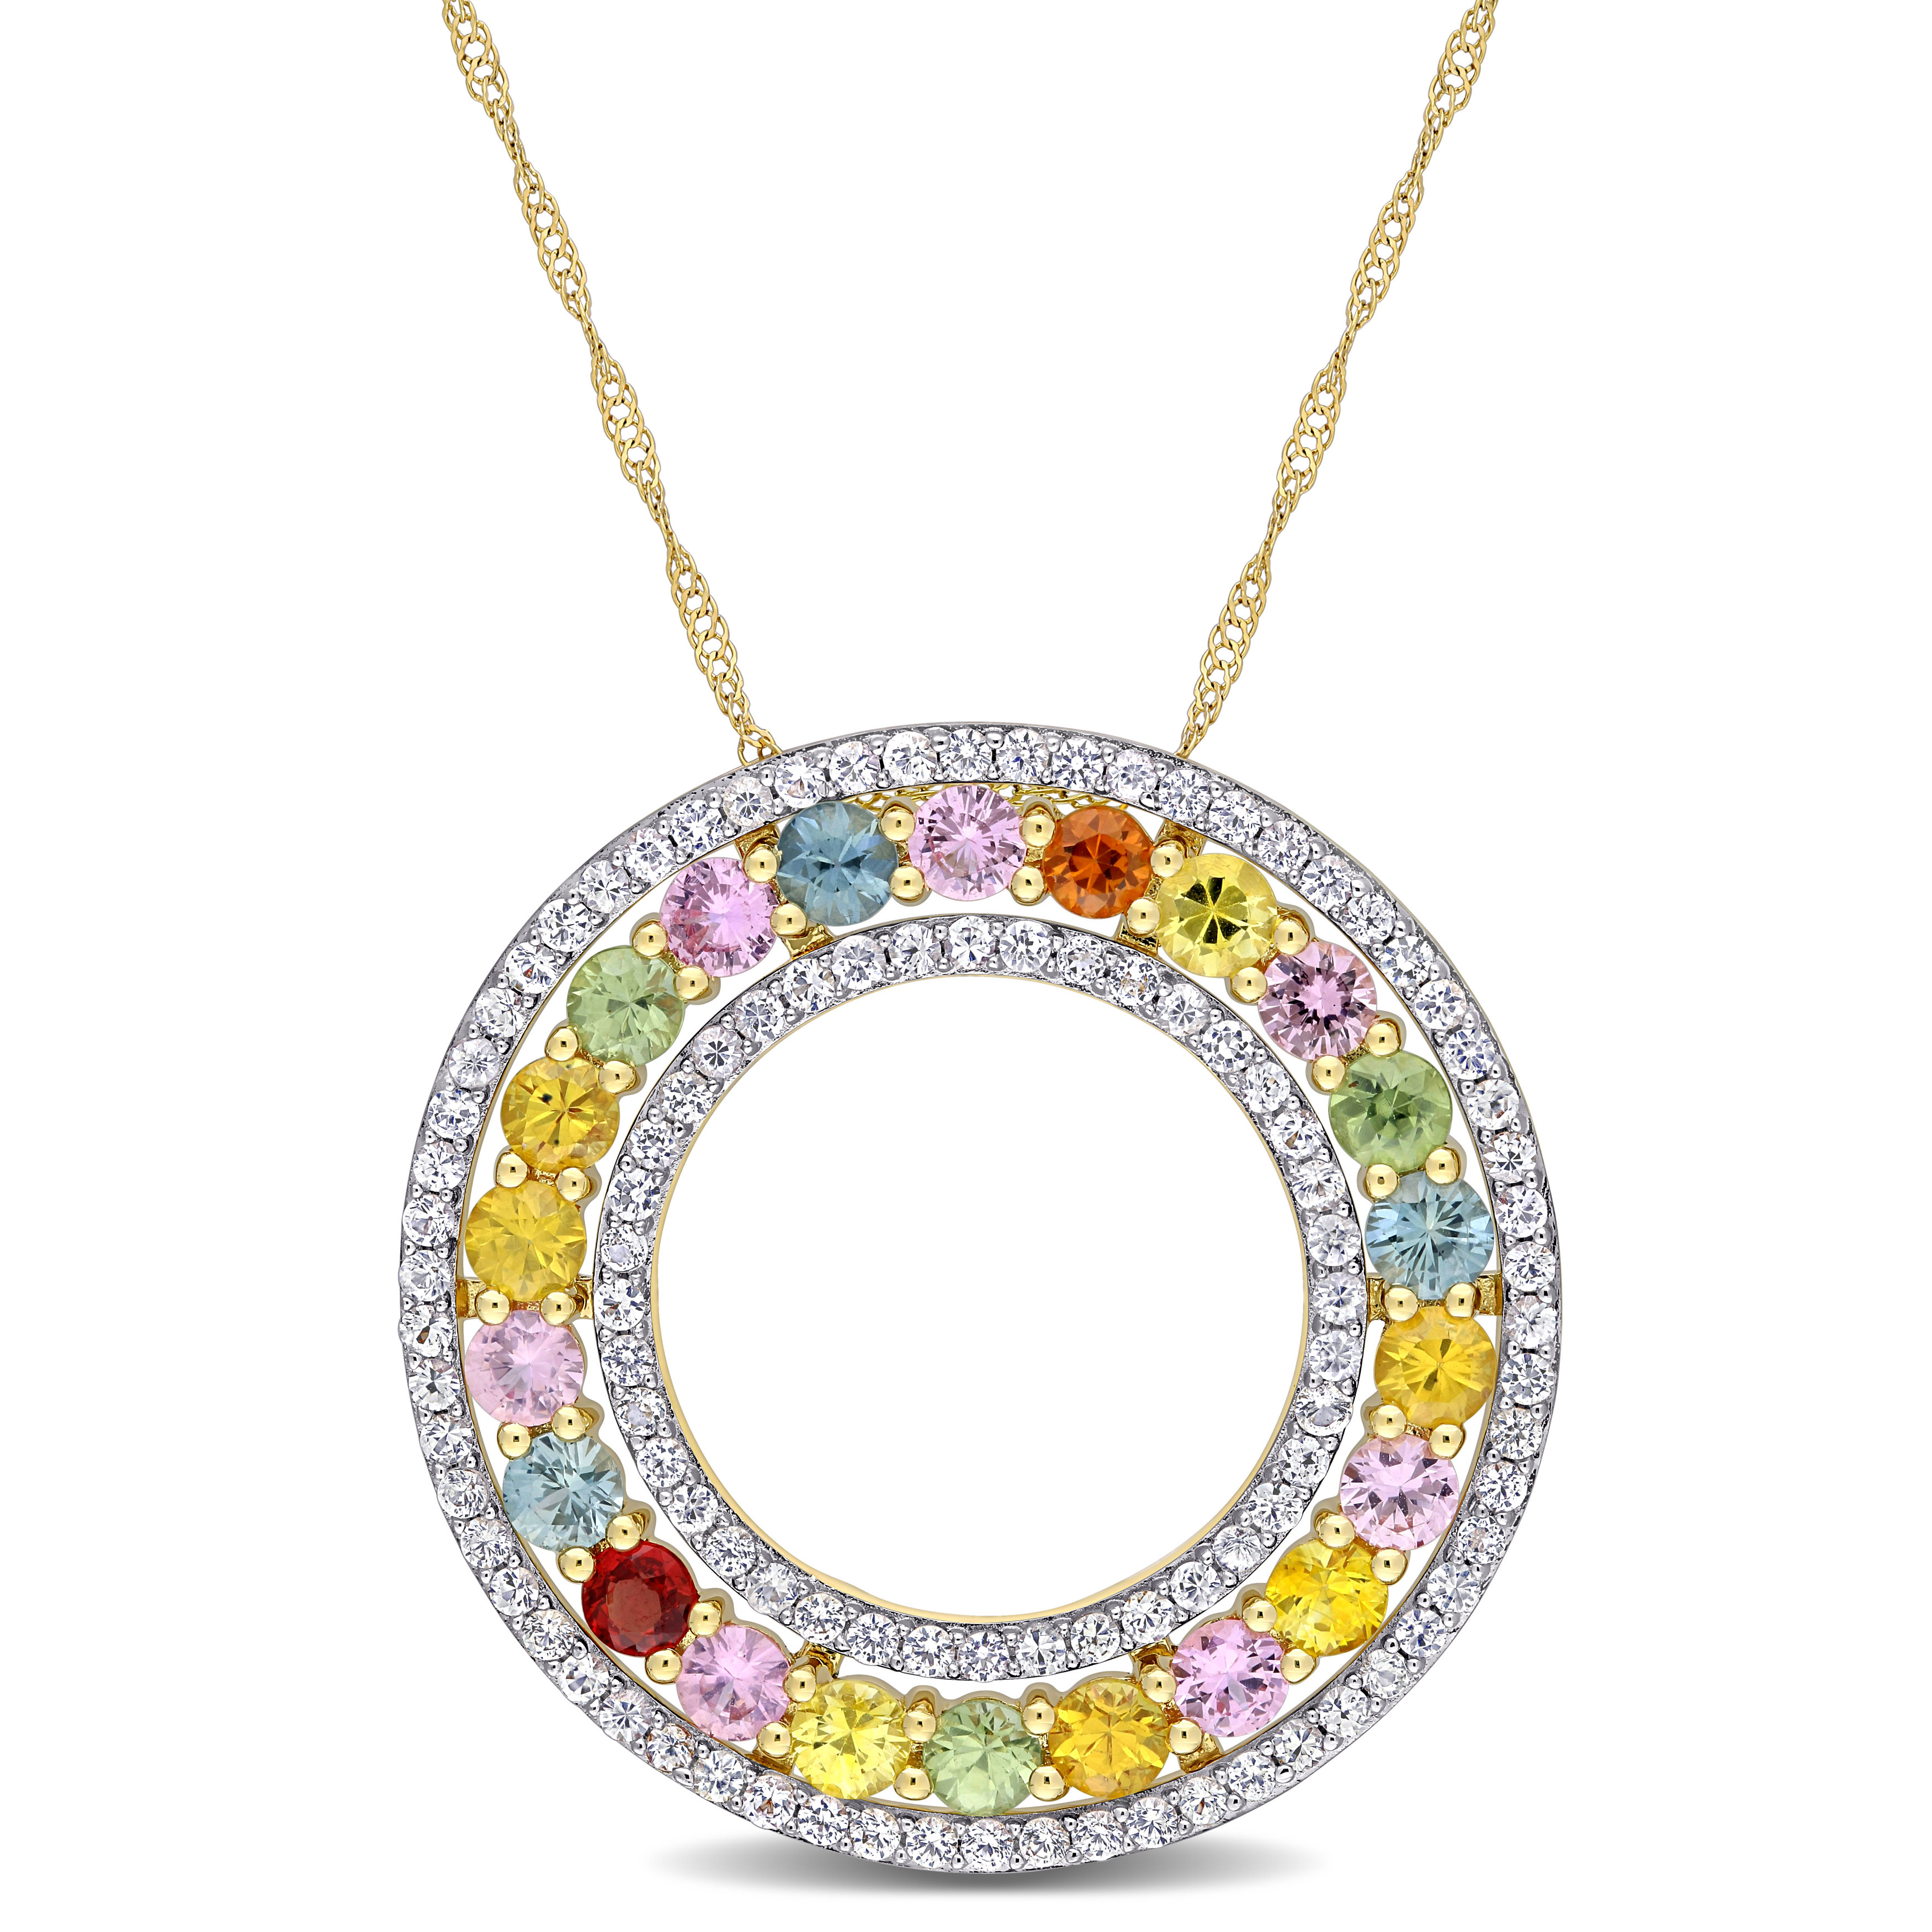 4 1/10 CT TGW Multi-Color Sapphire Circle Pendant with Chain in 14k Yellow Gold - 18 in.